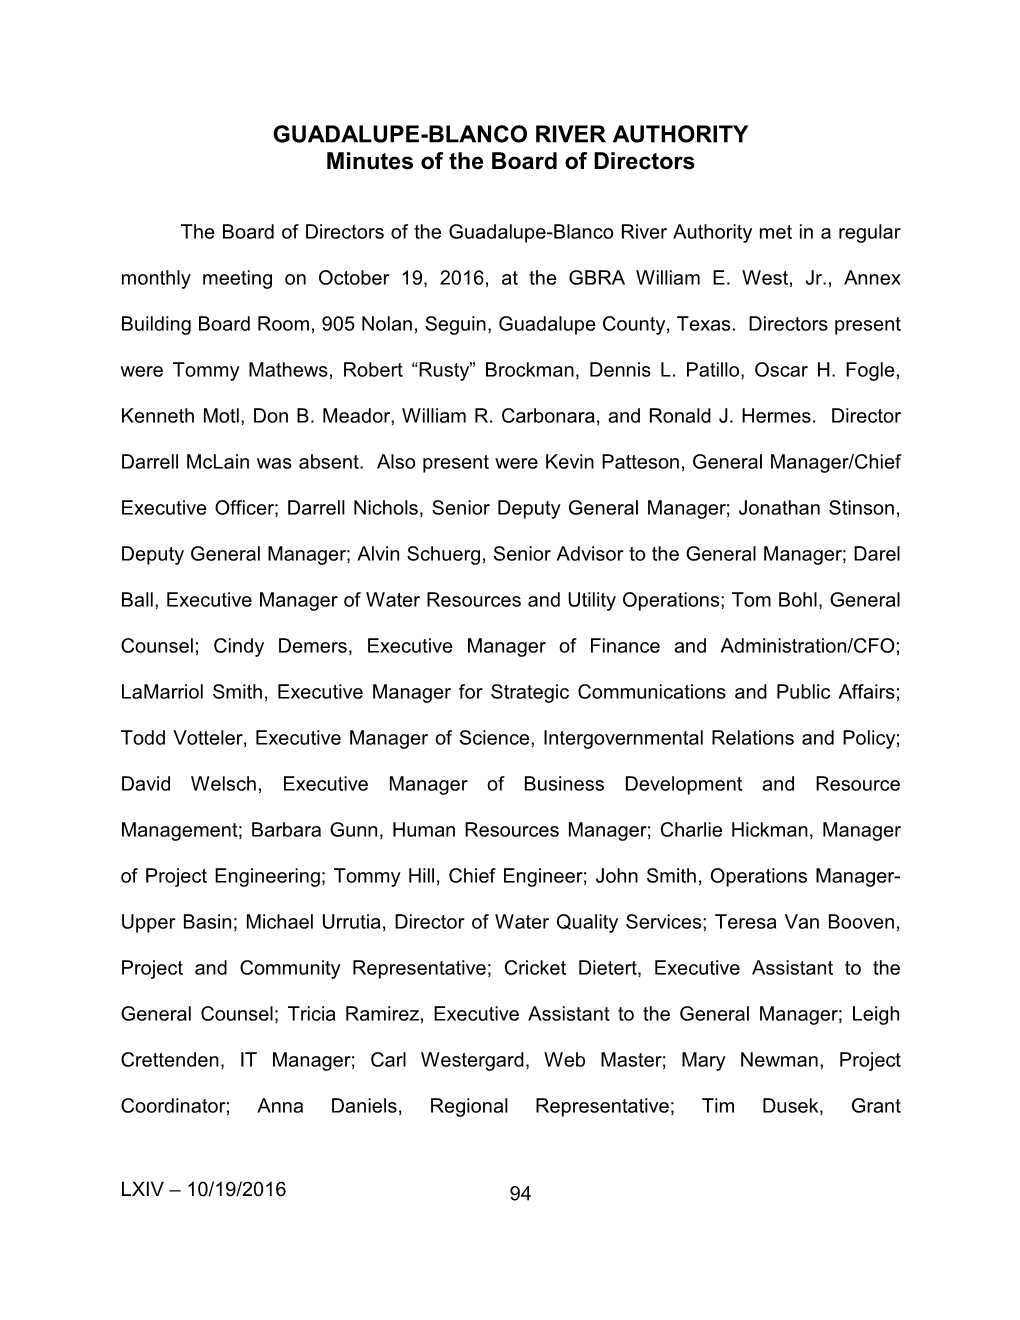 GUADALUPE-BLANCO RIVER AUTHORITY Minutes of the Board of Directors